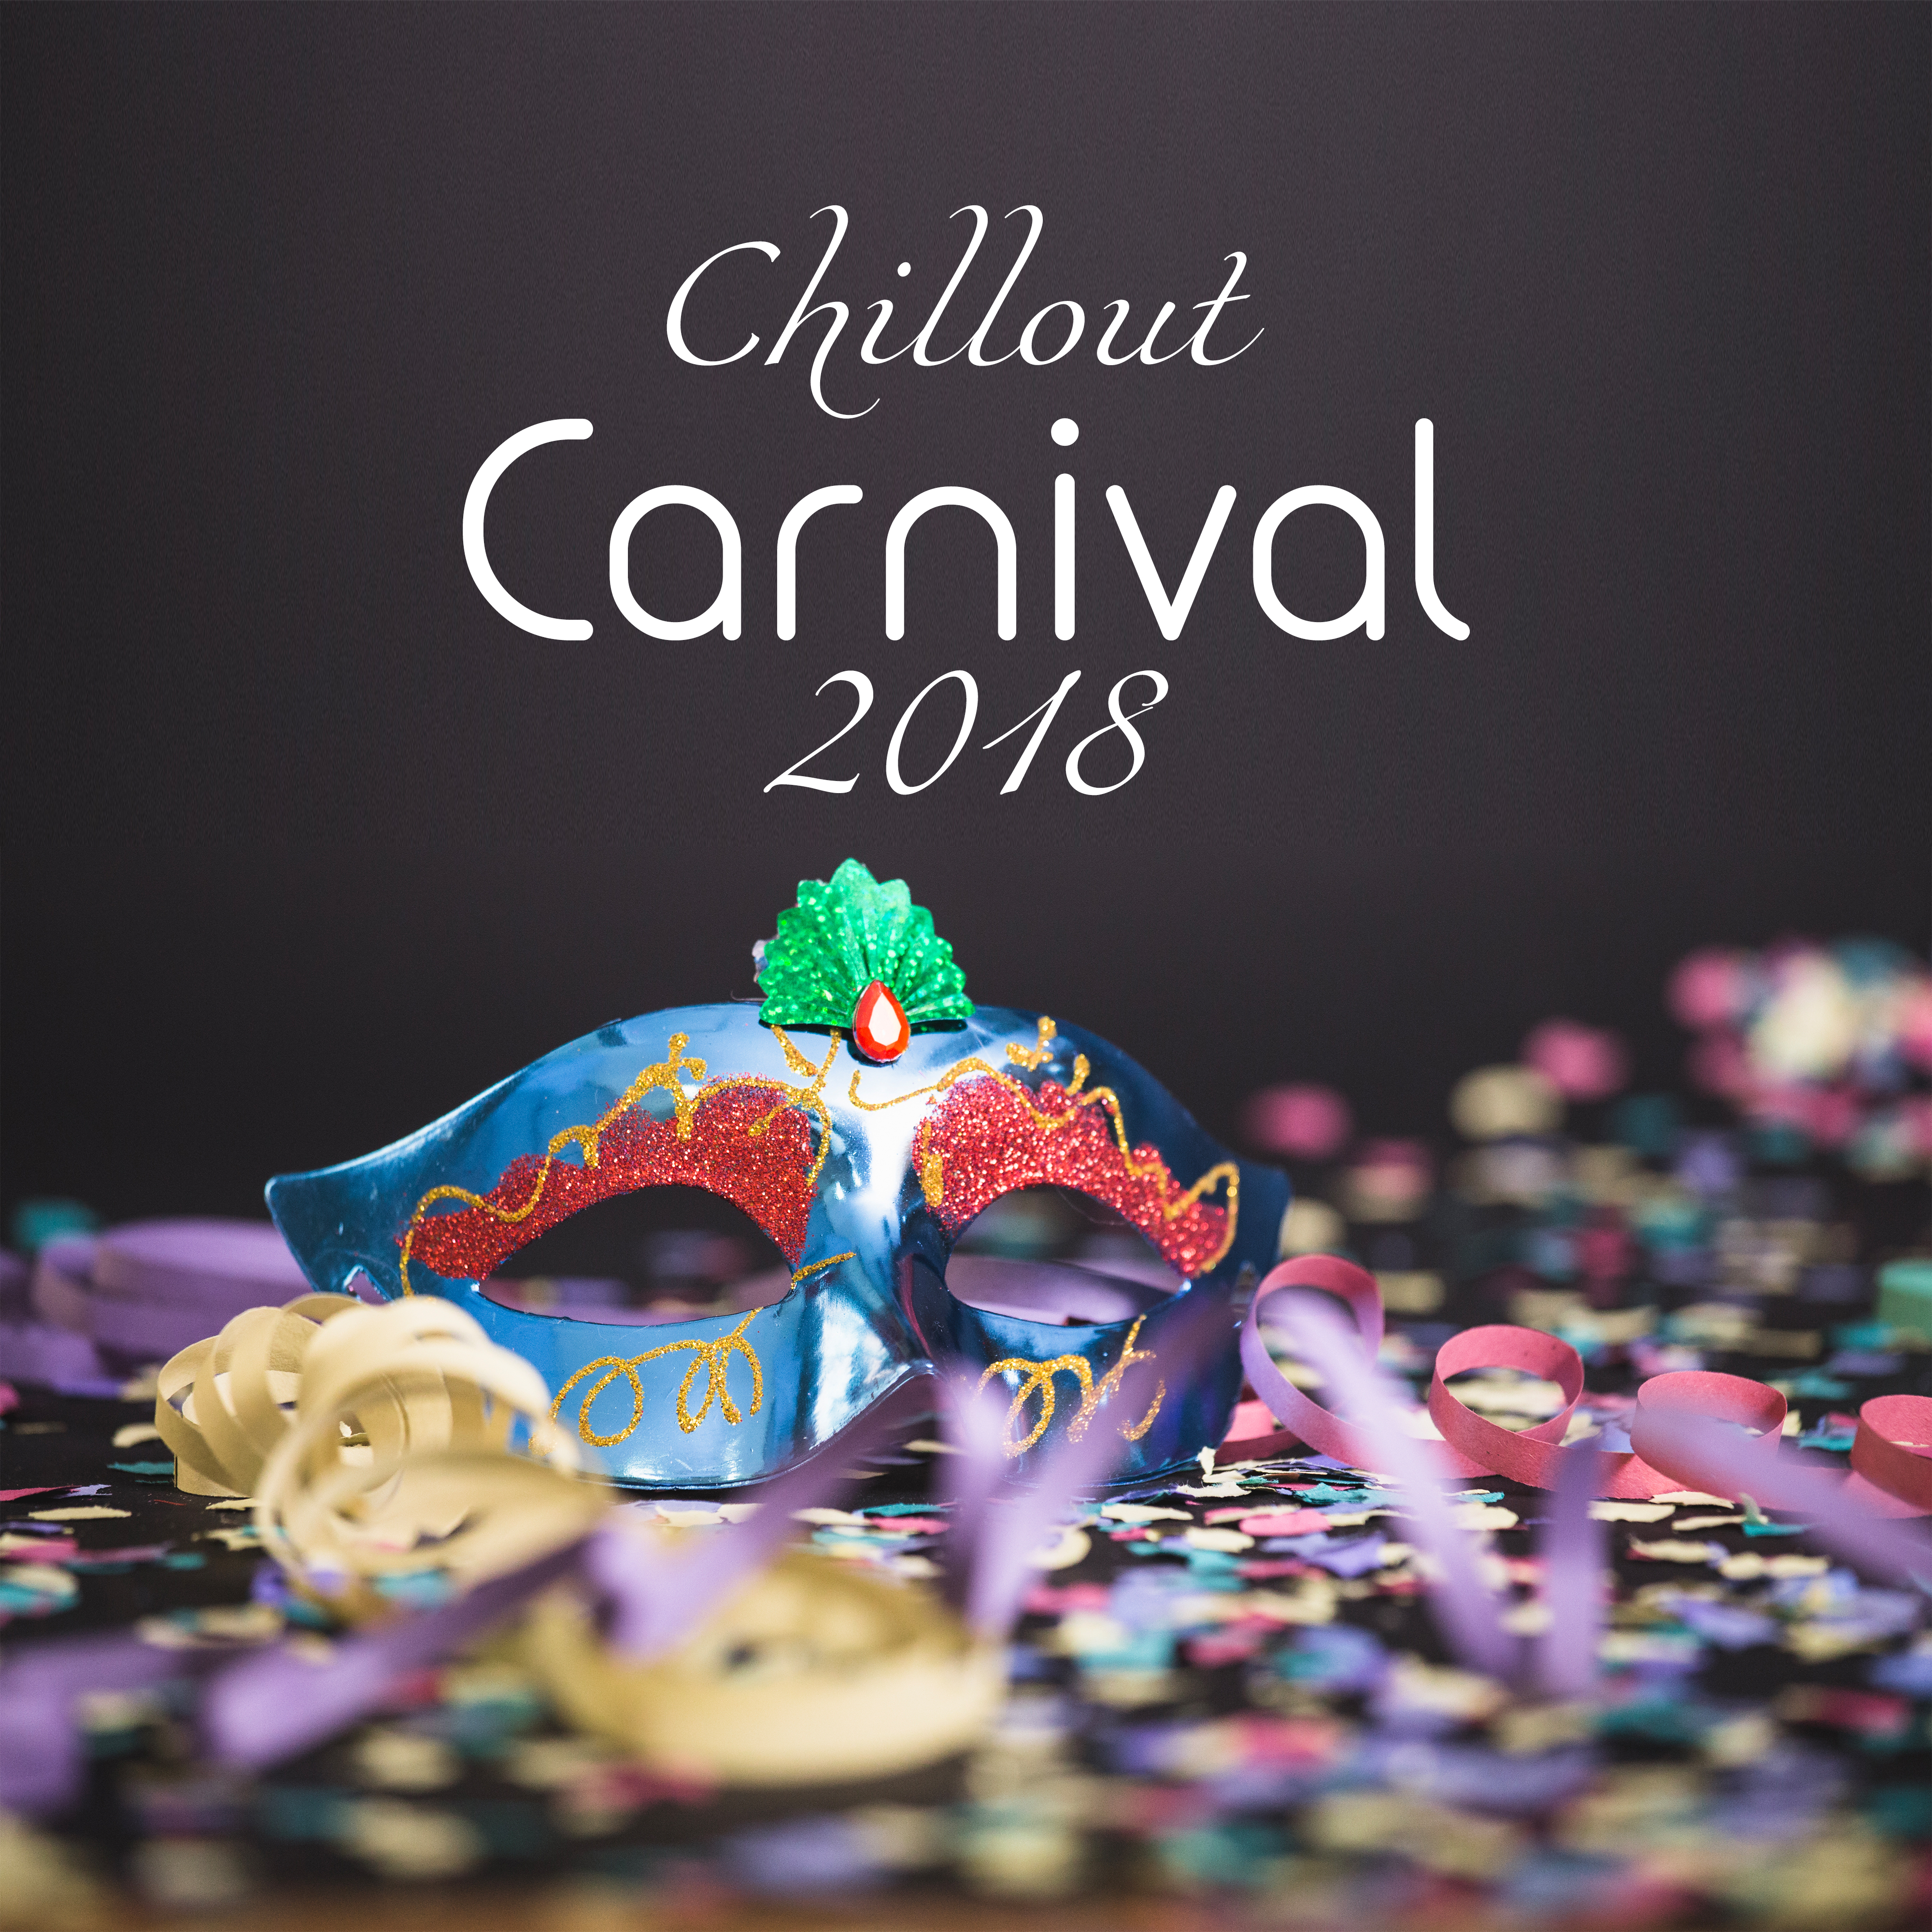 Chillout Carnival 2018